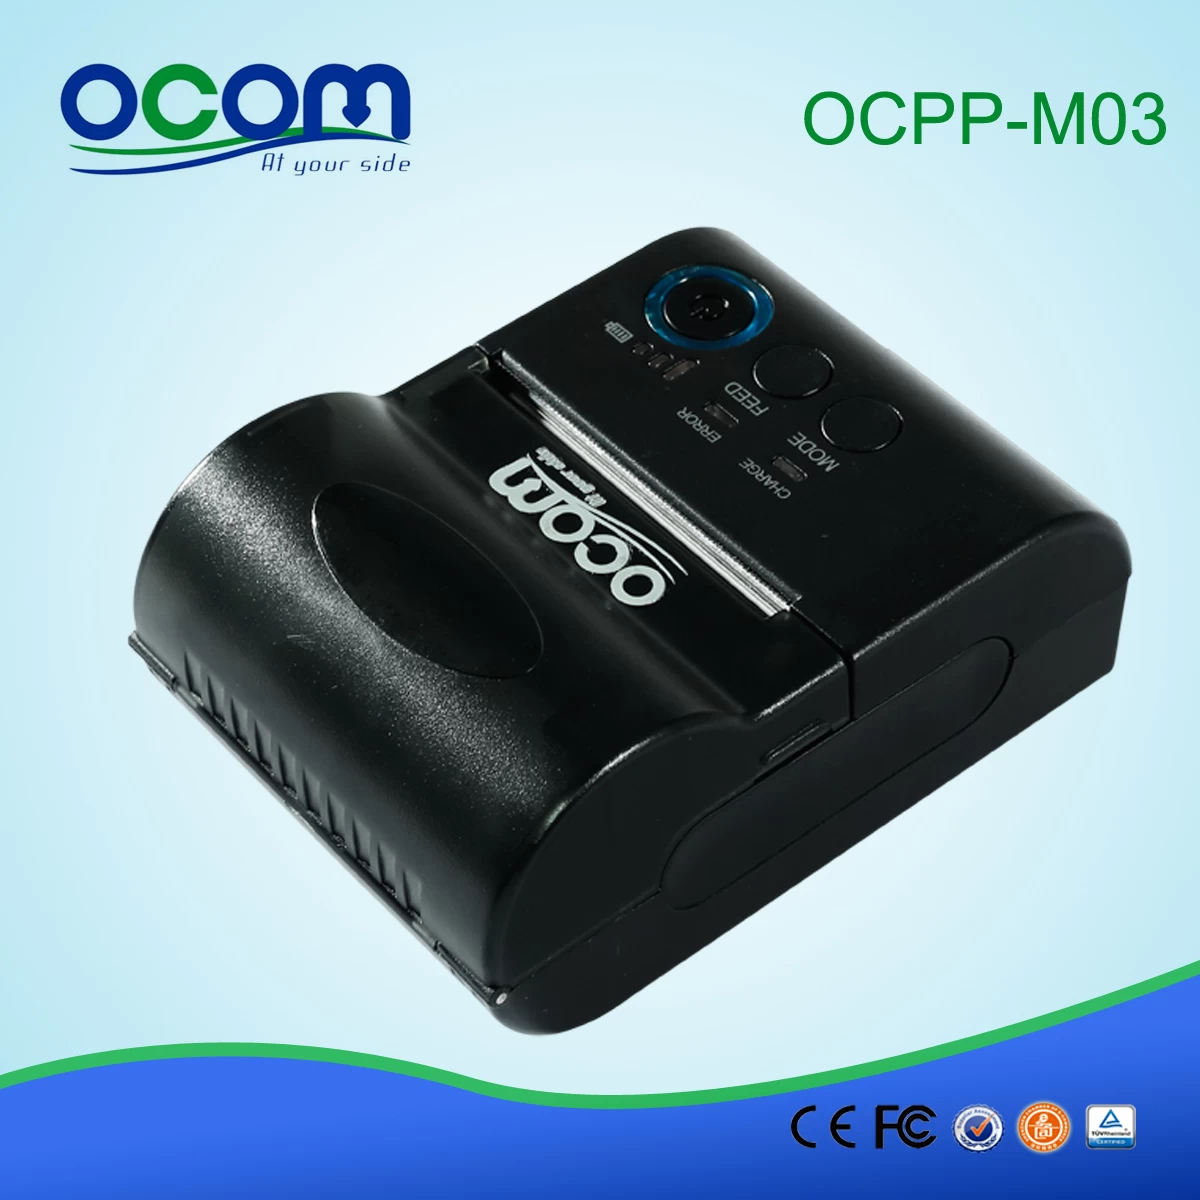 Android And  IOS 58mm Small Handheld Bluetooth Mobile Pos Thermal Receipt Printer(OCPP-M03)